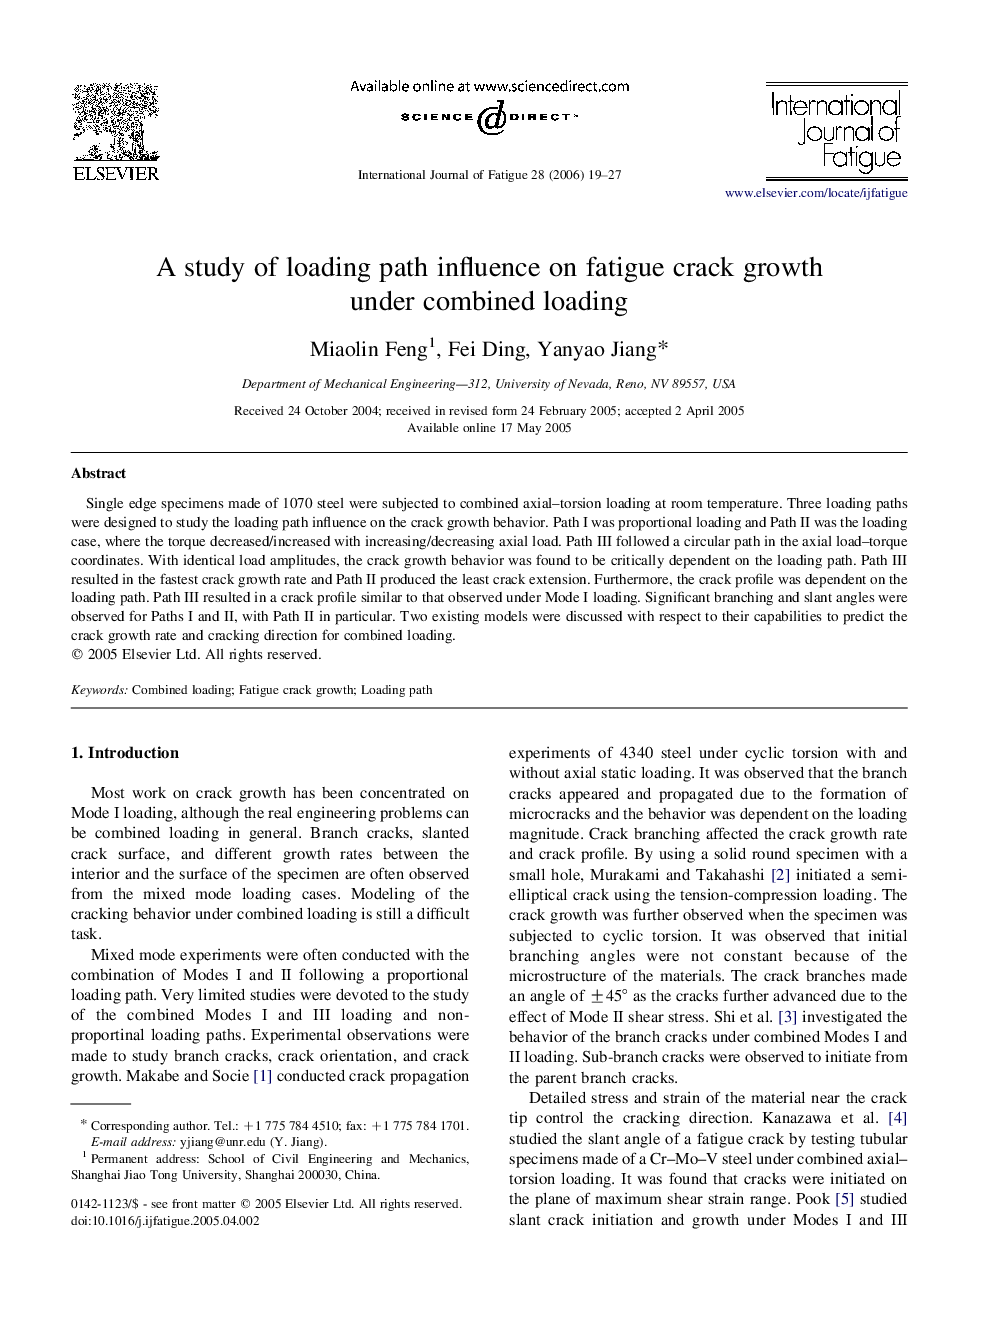 A study of loading path influence on fatigue crack growth under combined loading